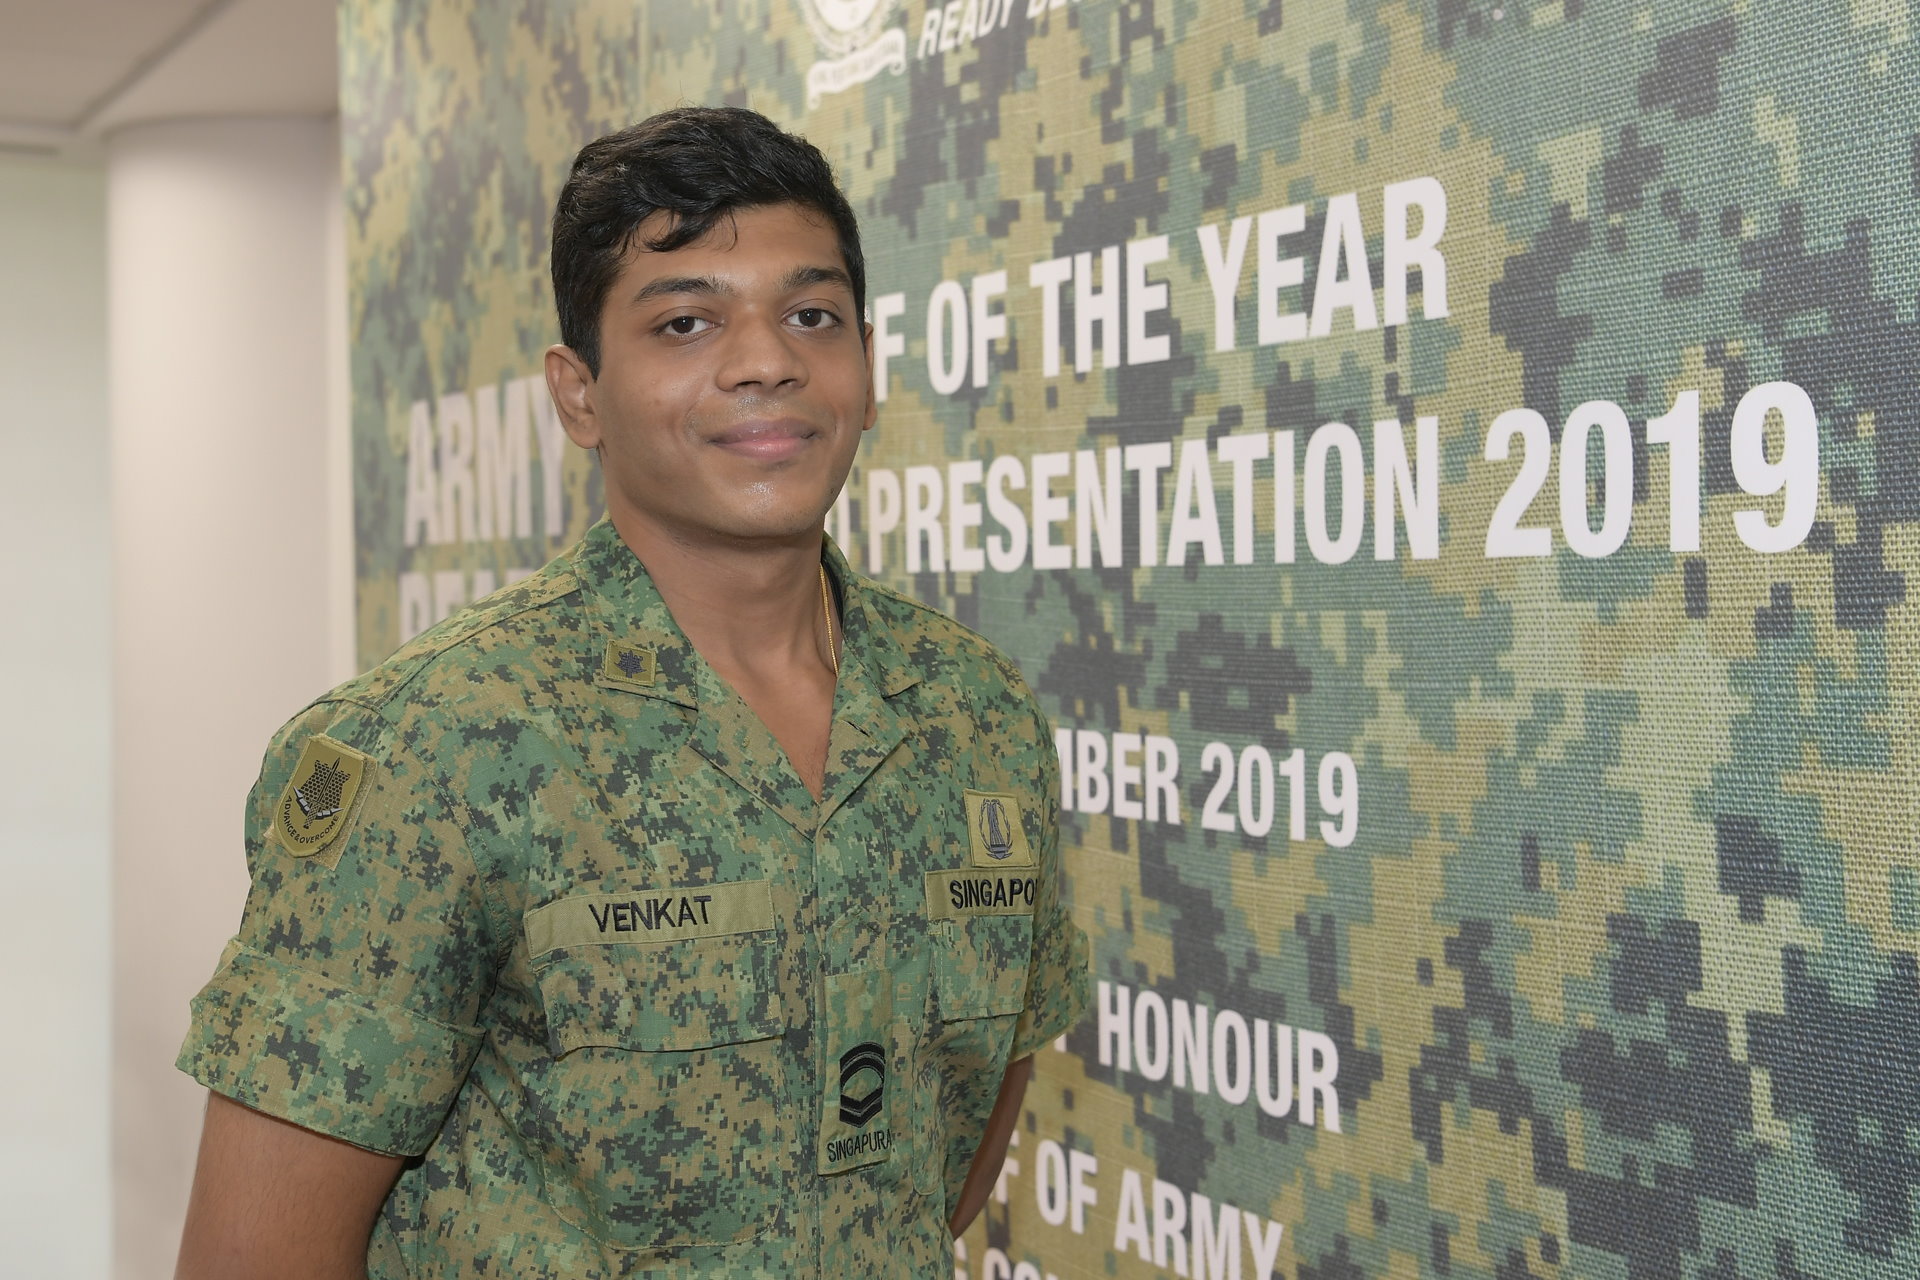 From obese to IPPT Gold & becoming NSF of the Year